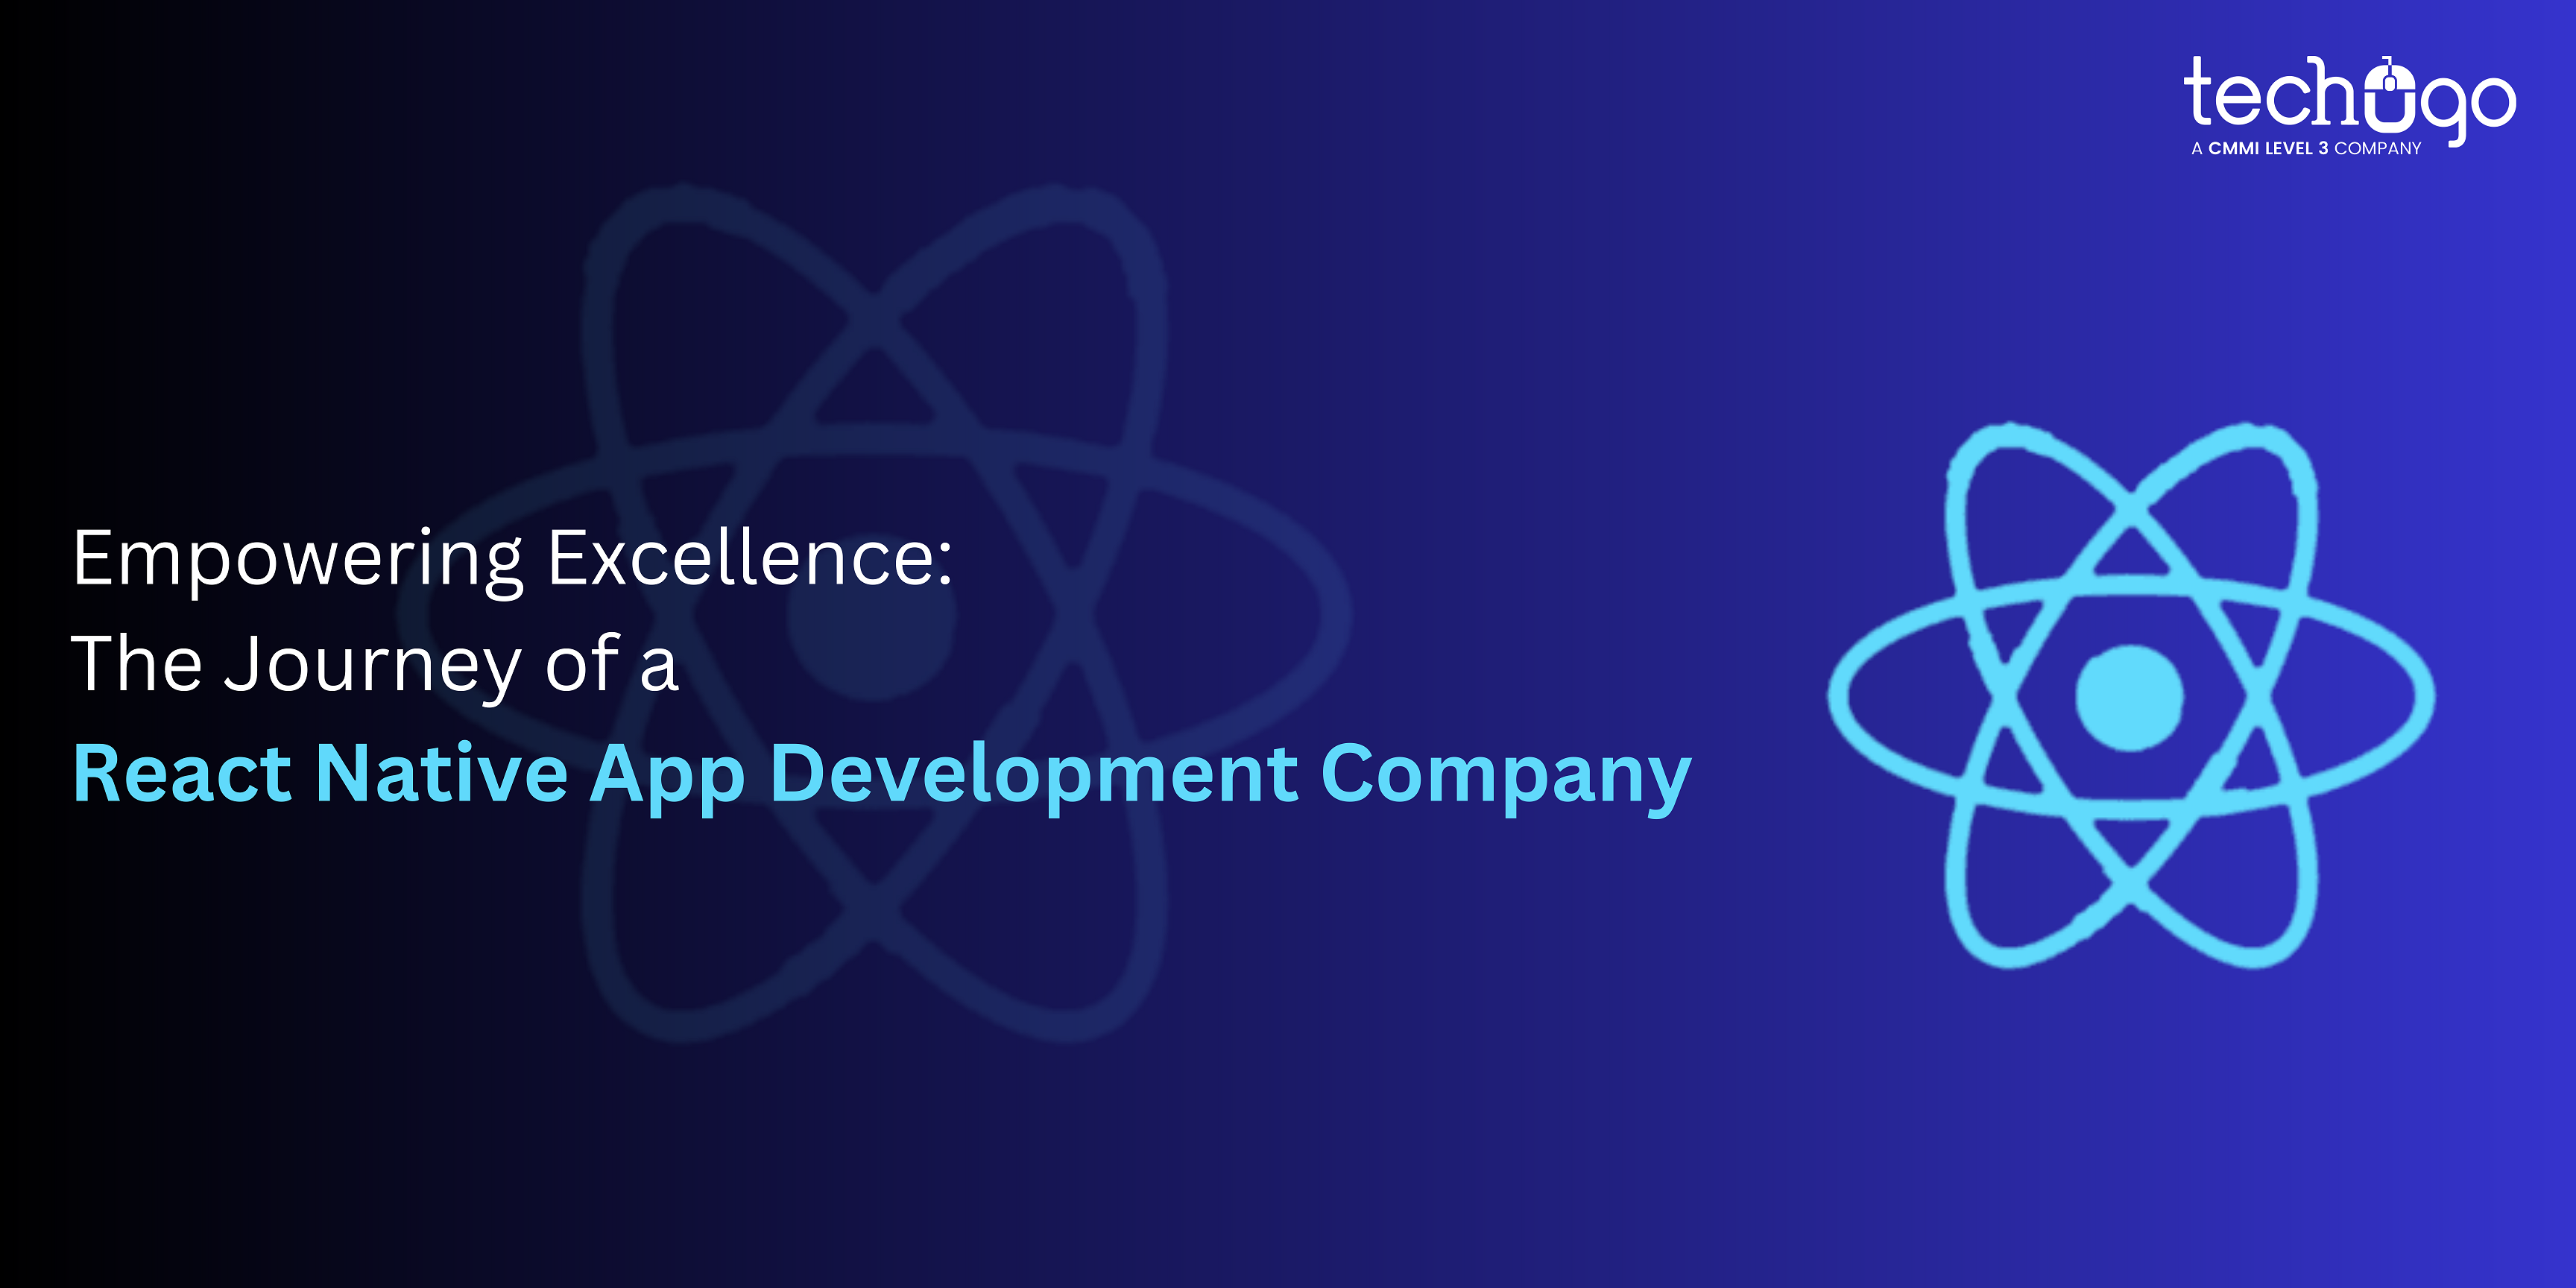 Empowering Excellence: The Journey of a React Native App Development Company